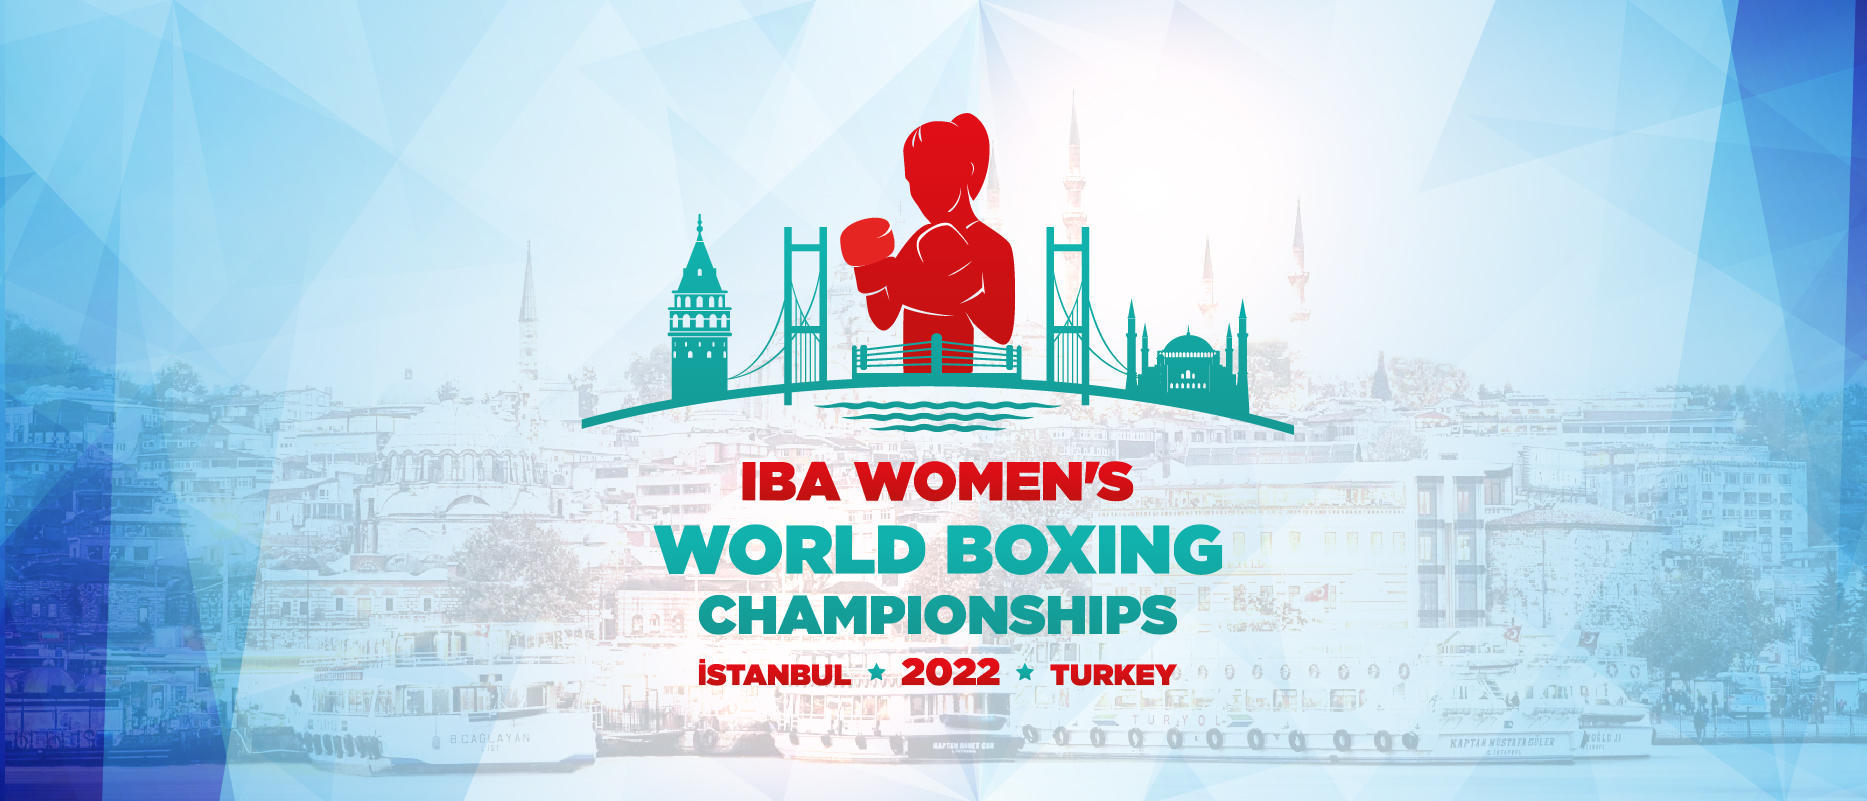 12th IBA Womens World Boxing Championships kick-started in Istanbul